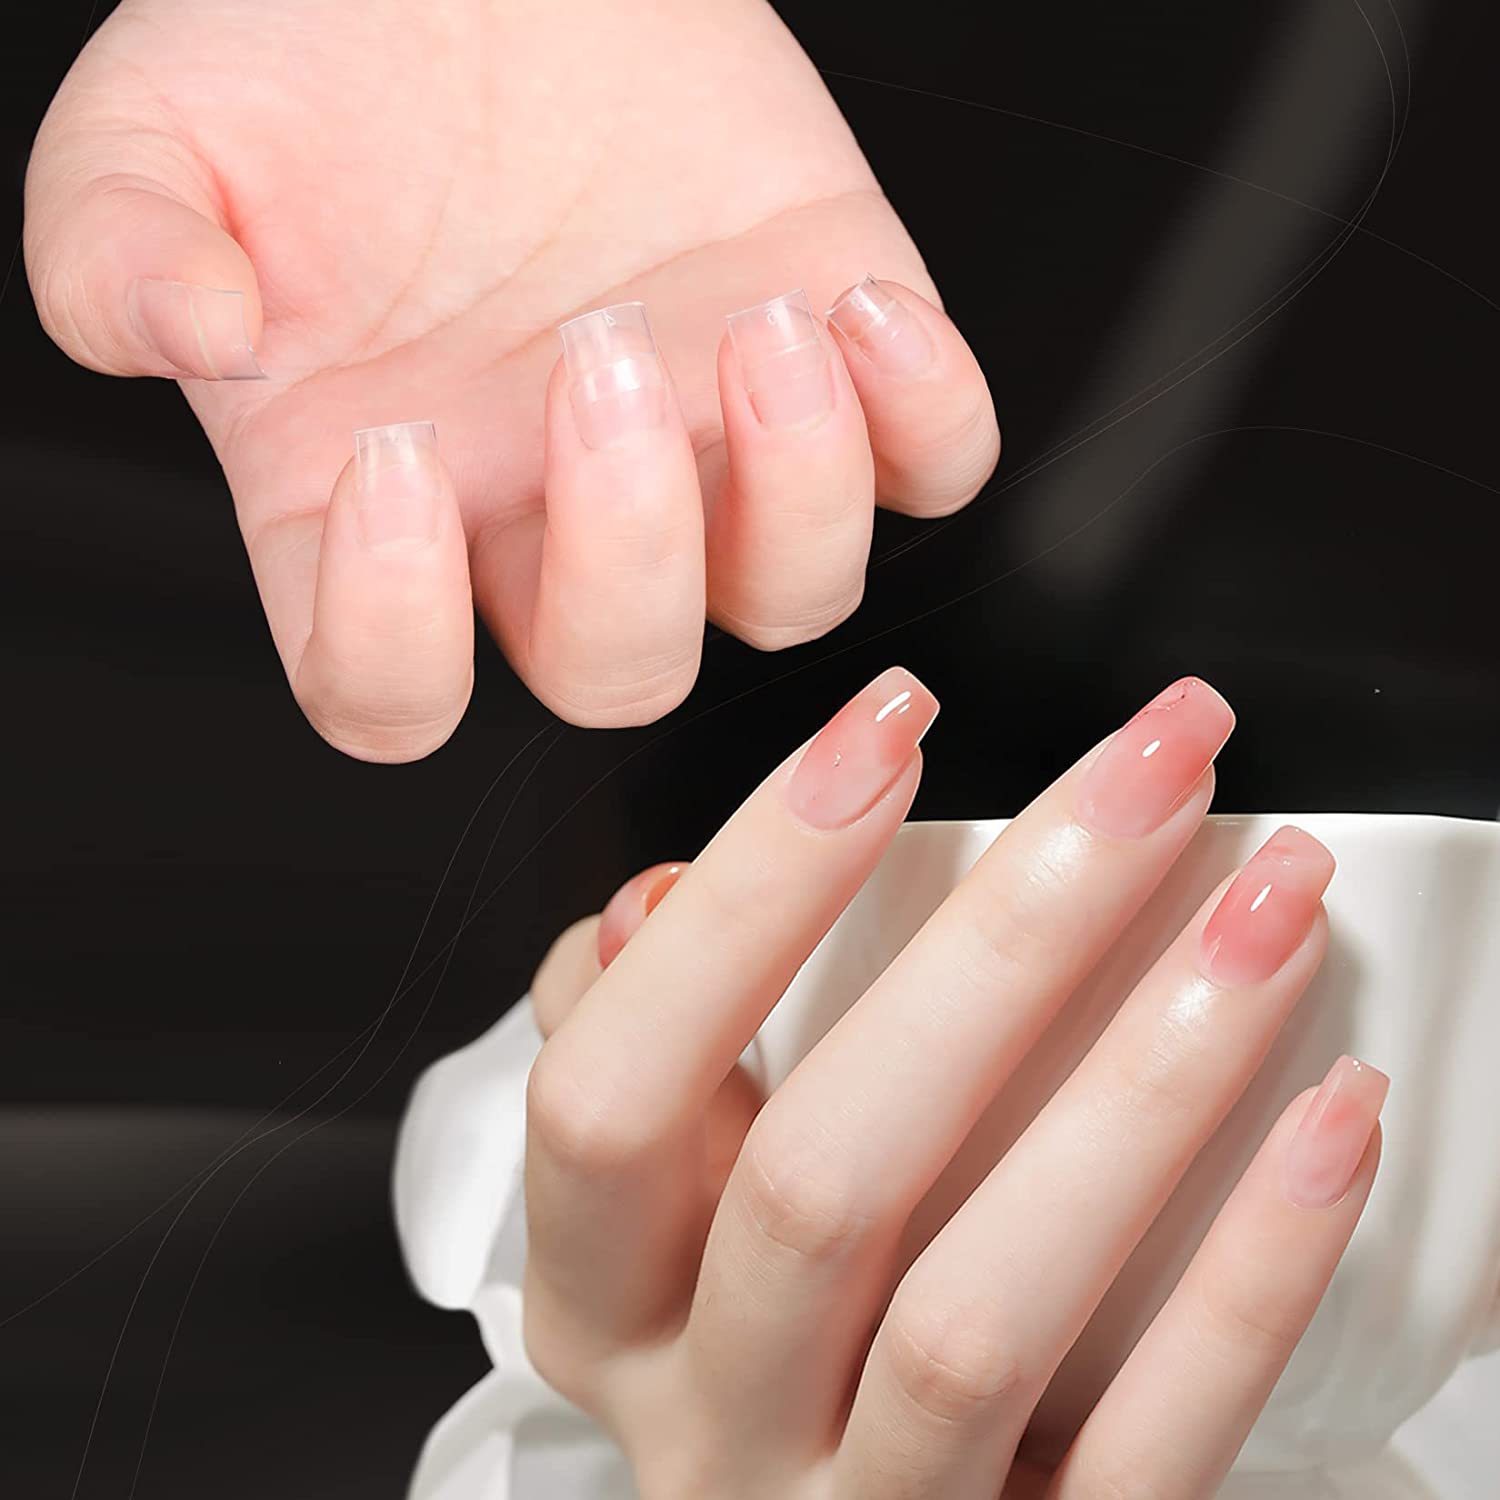 European Manicure Vs. French Manicure: What's The Difference?